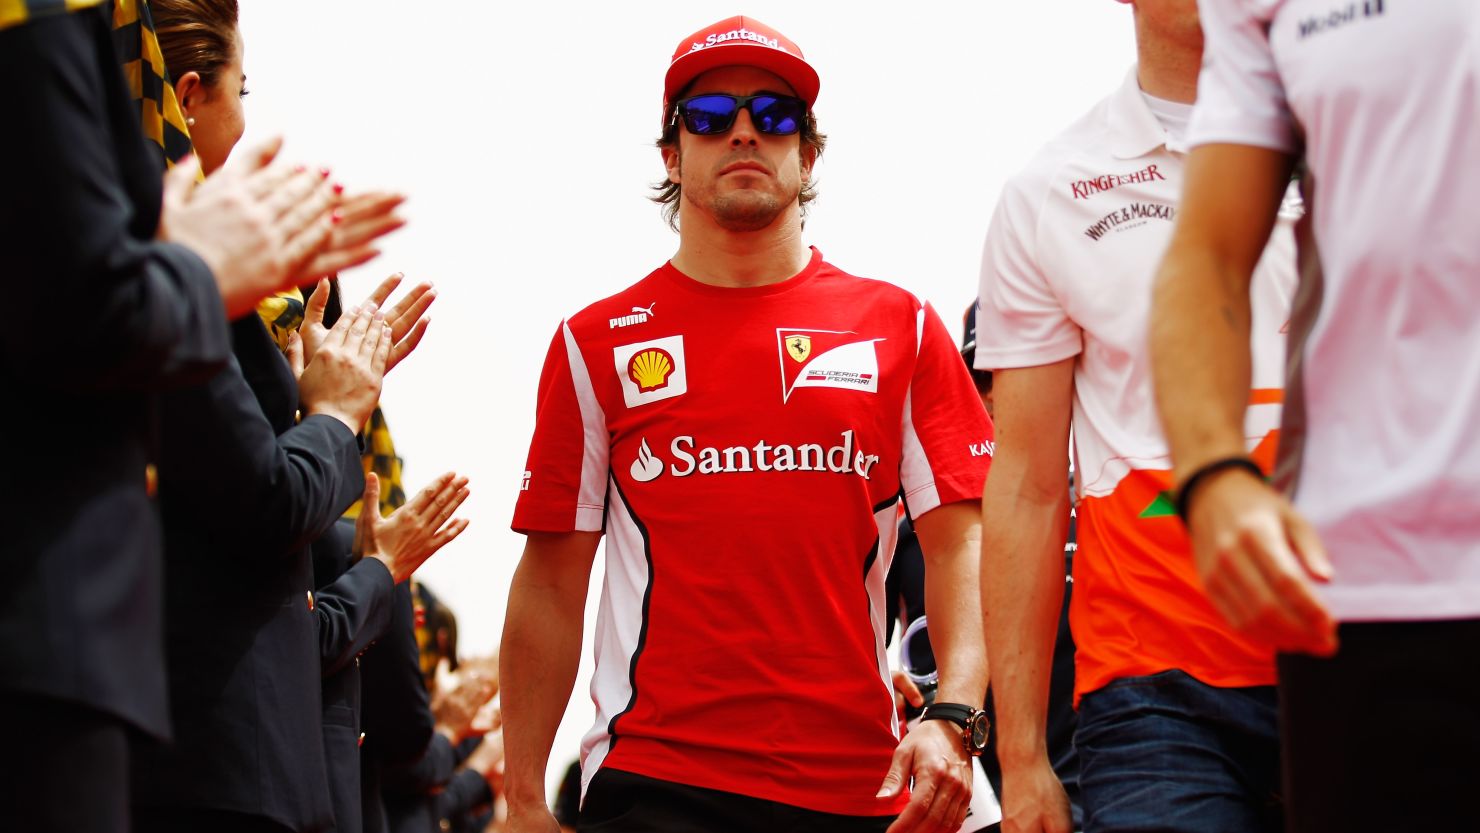 Two-time world champion Fernando Alonso will be hoping to impress in front of a home crowd at the Spanish Grand Prix.